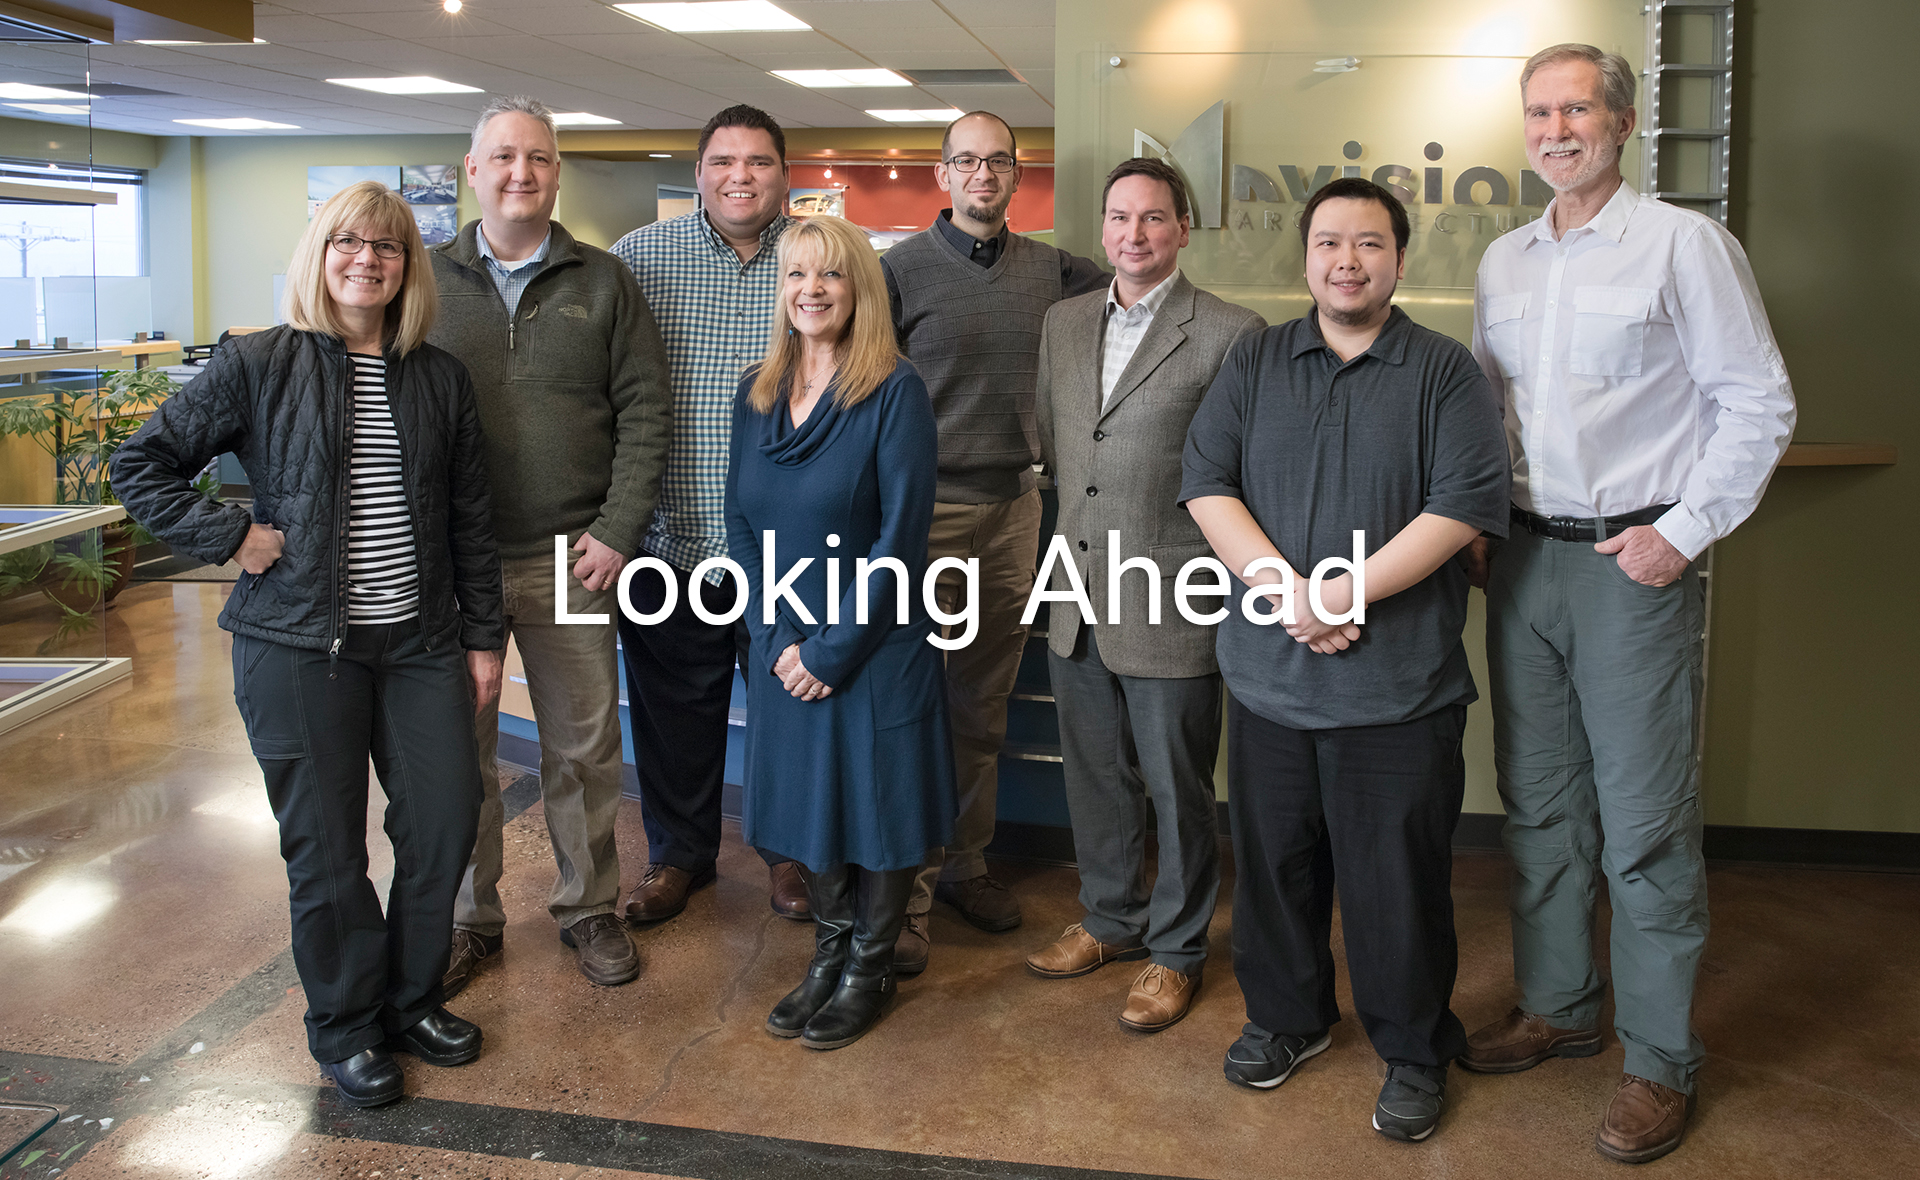 Nvision Architecture employees together looking ahead